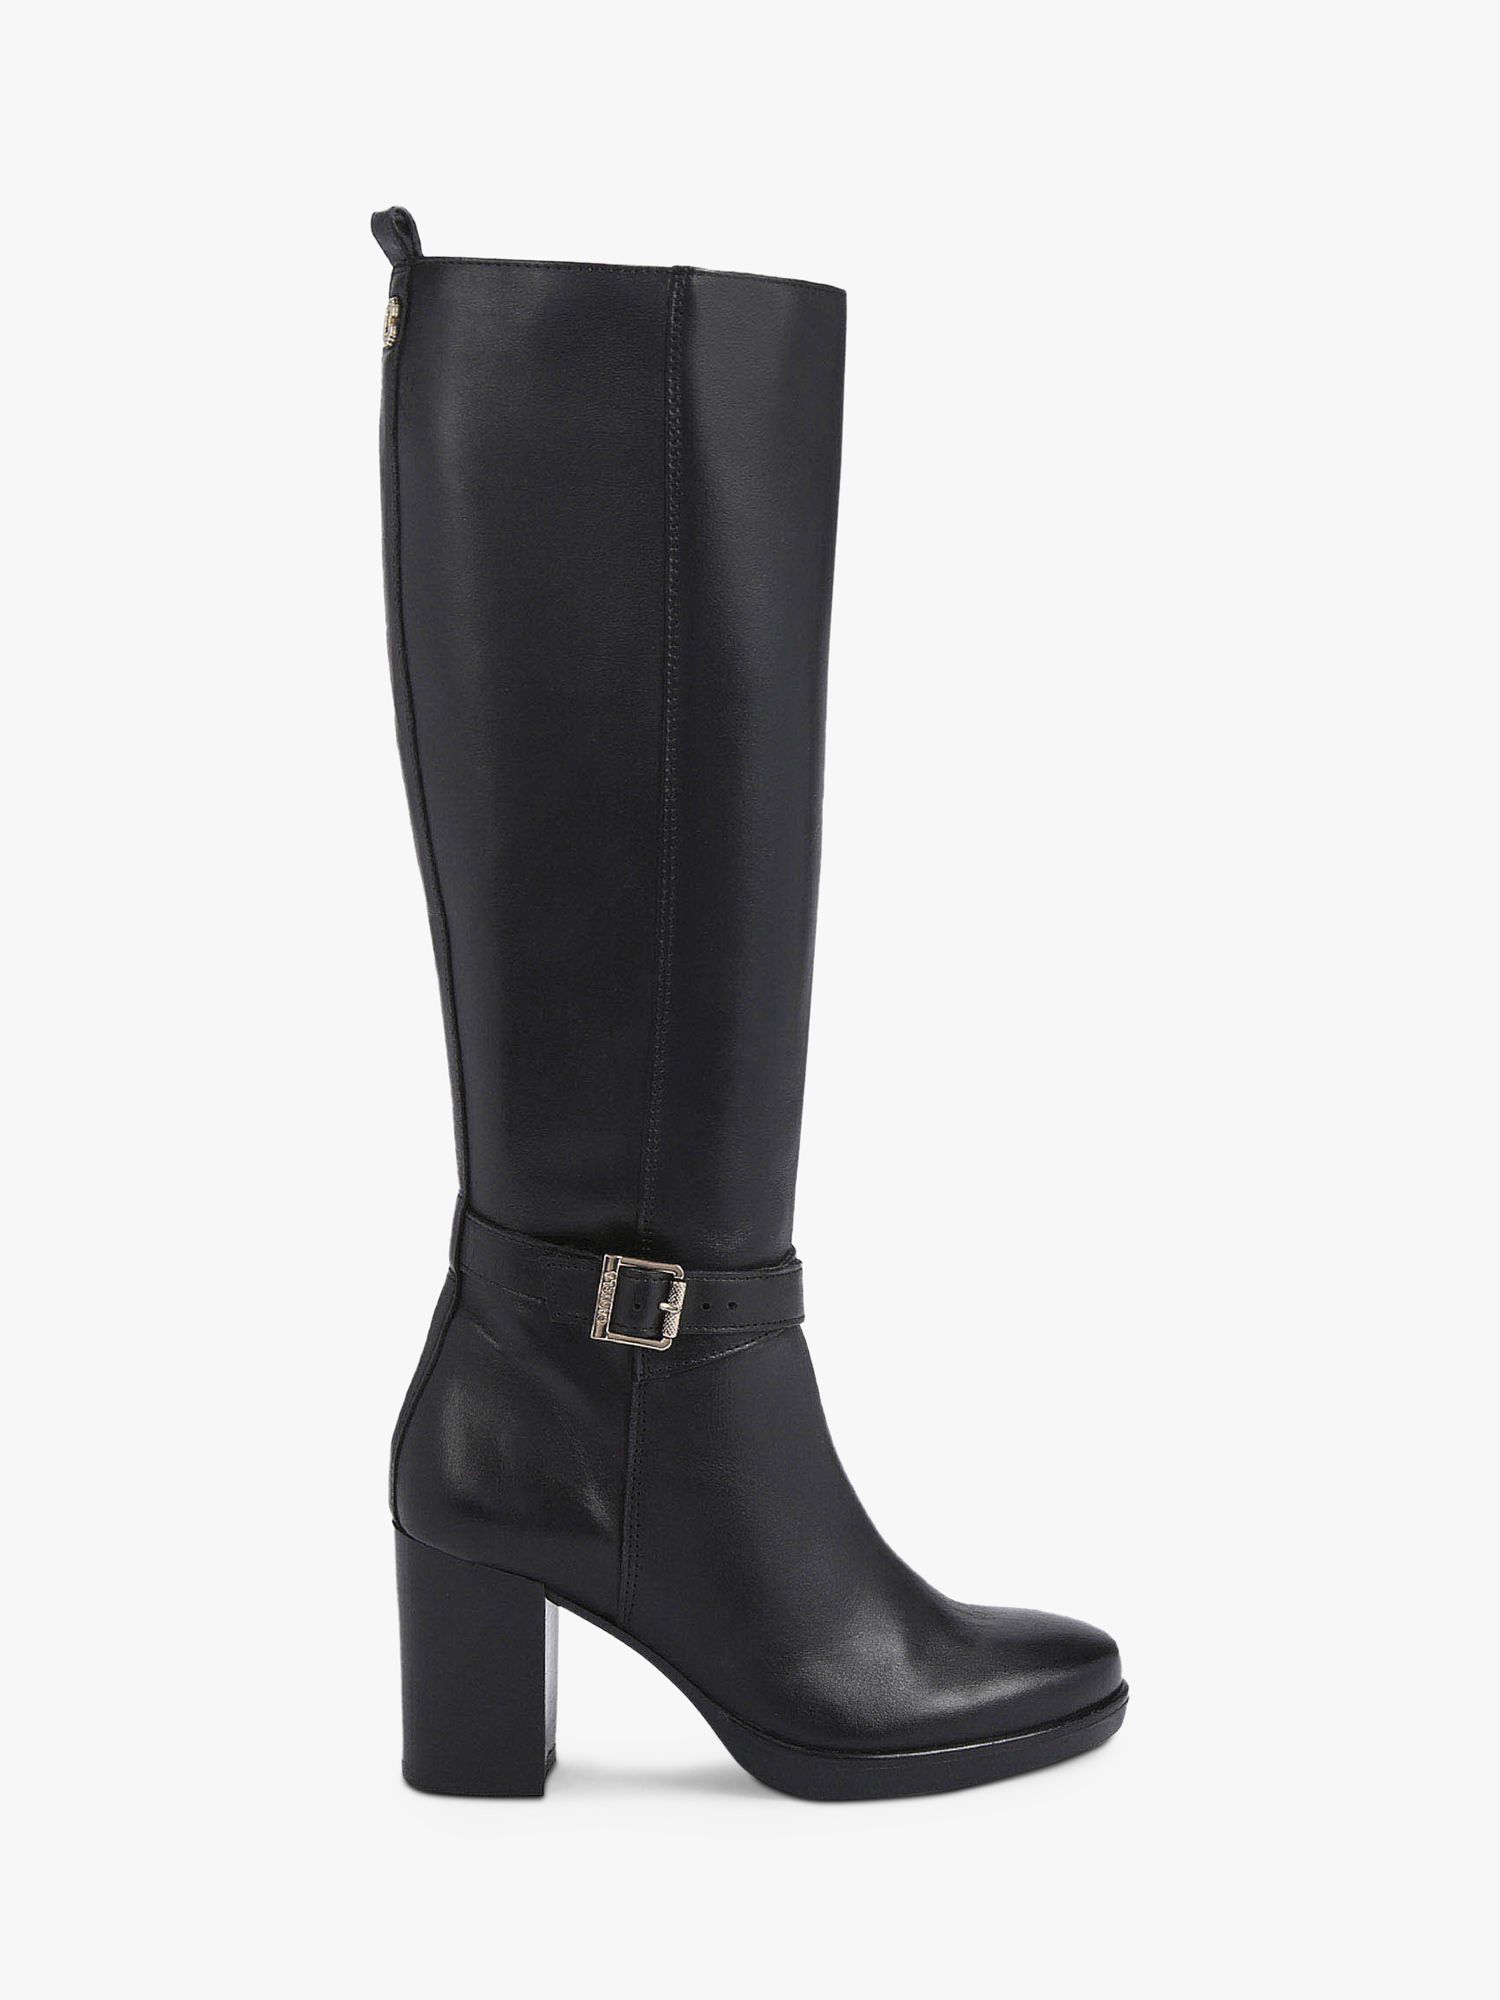 Carvela Silver Leather Knee High Boots, Black at John Lewis & Partners